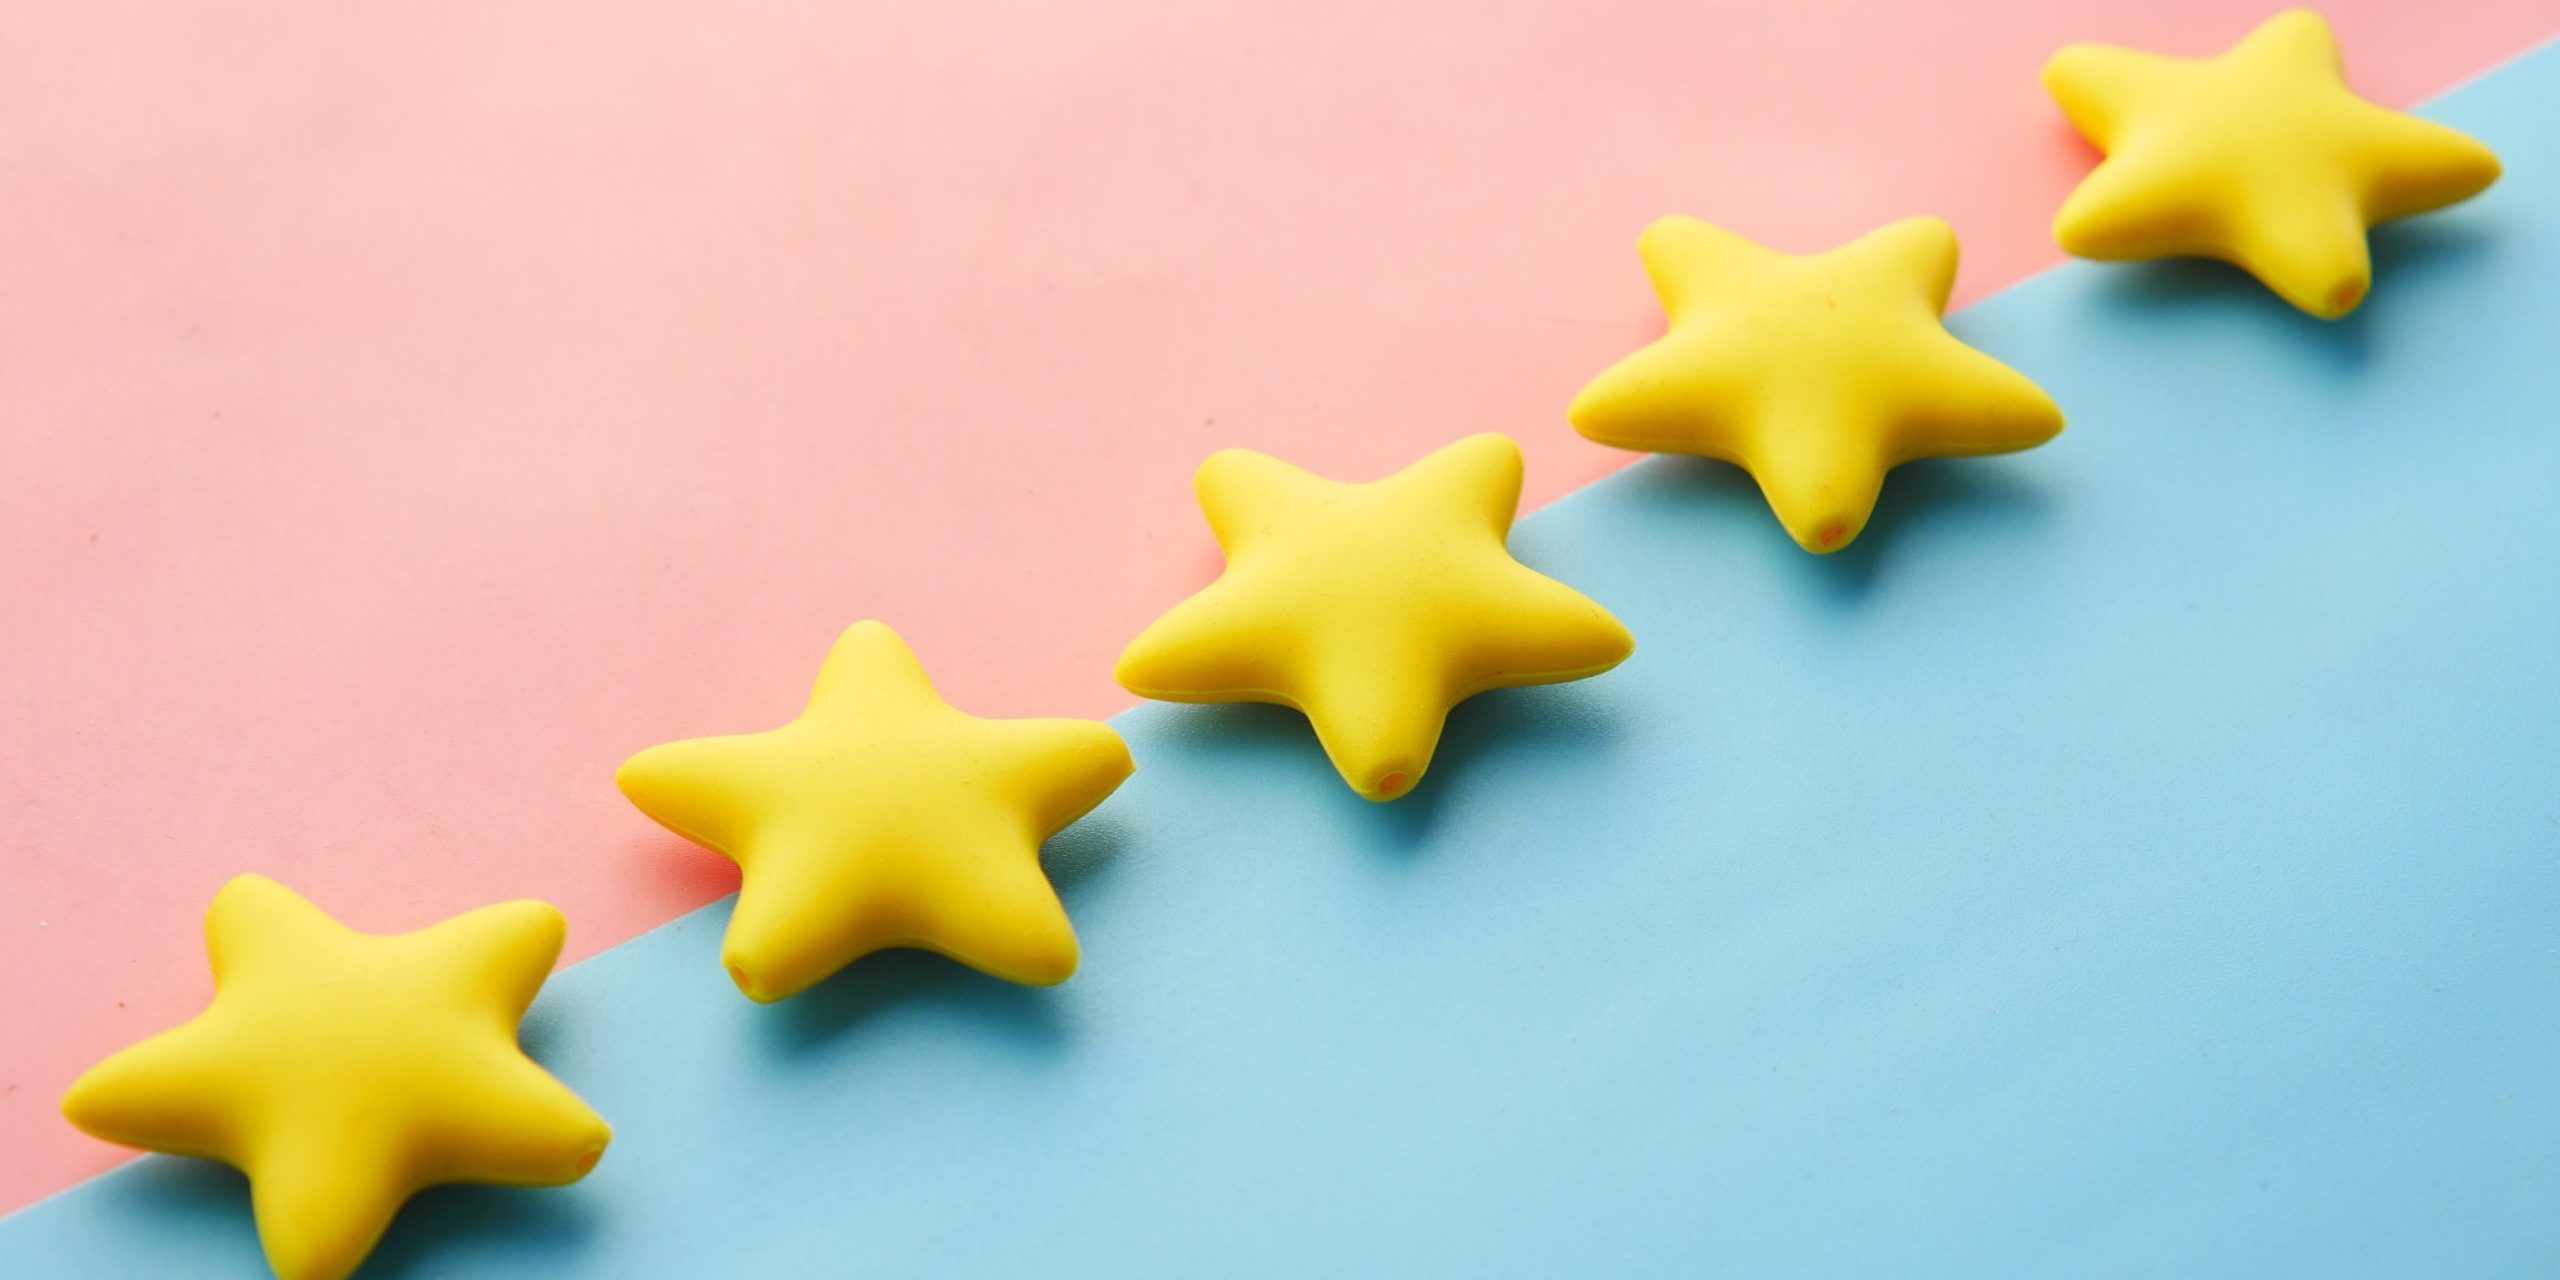 Five yellow stars lined diagonally on a pink and light blue background